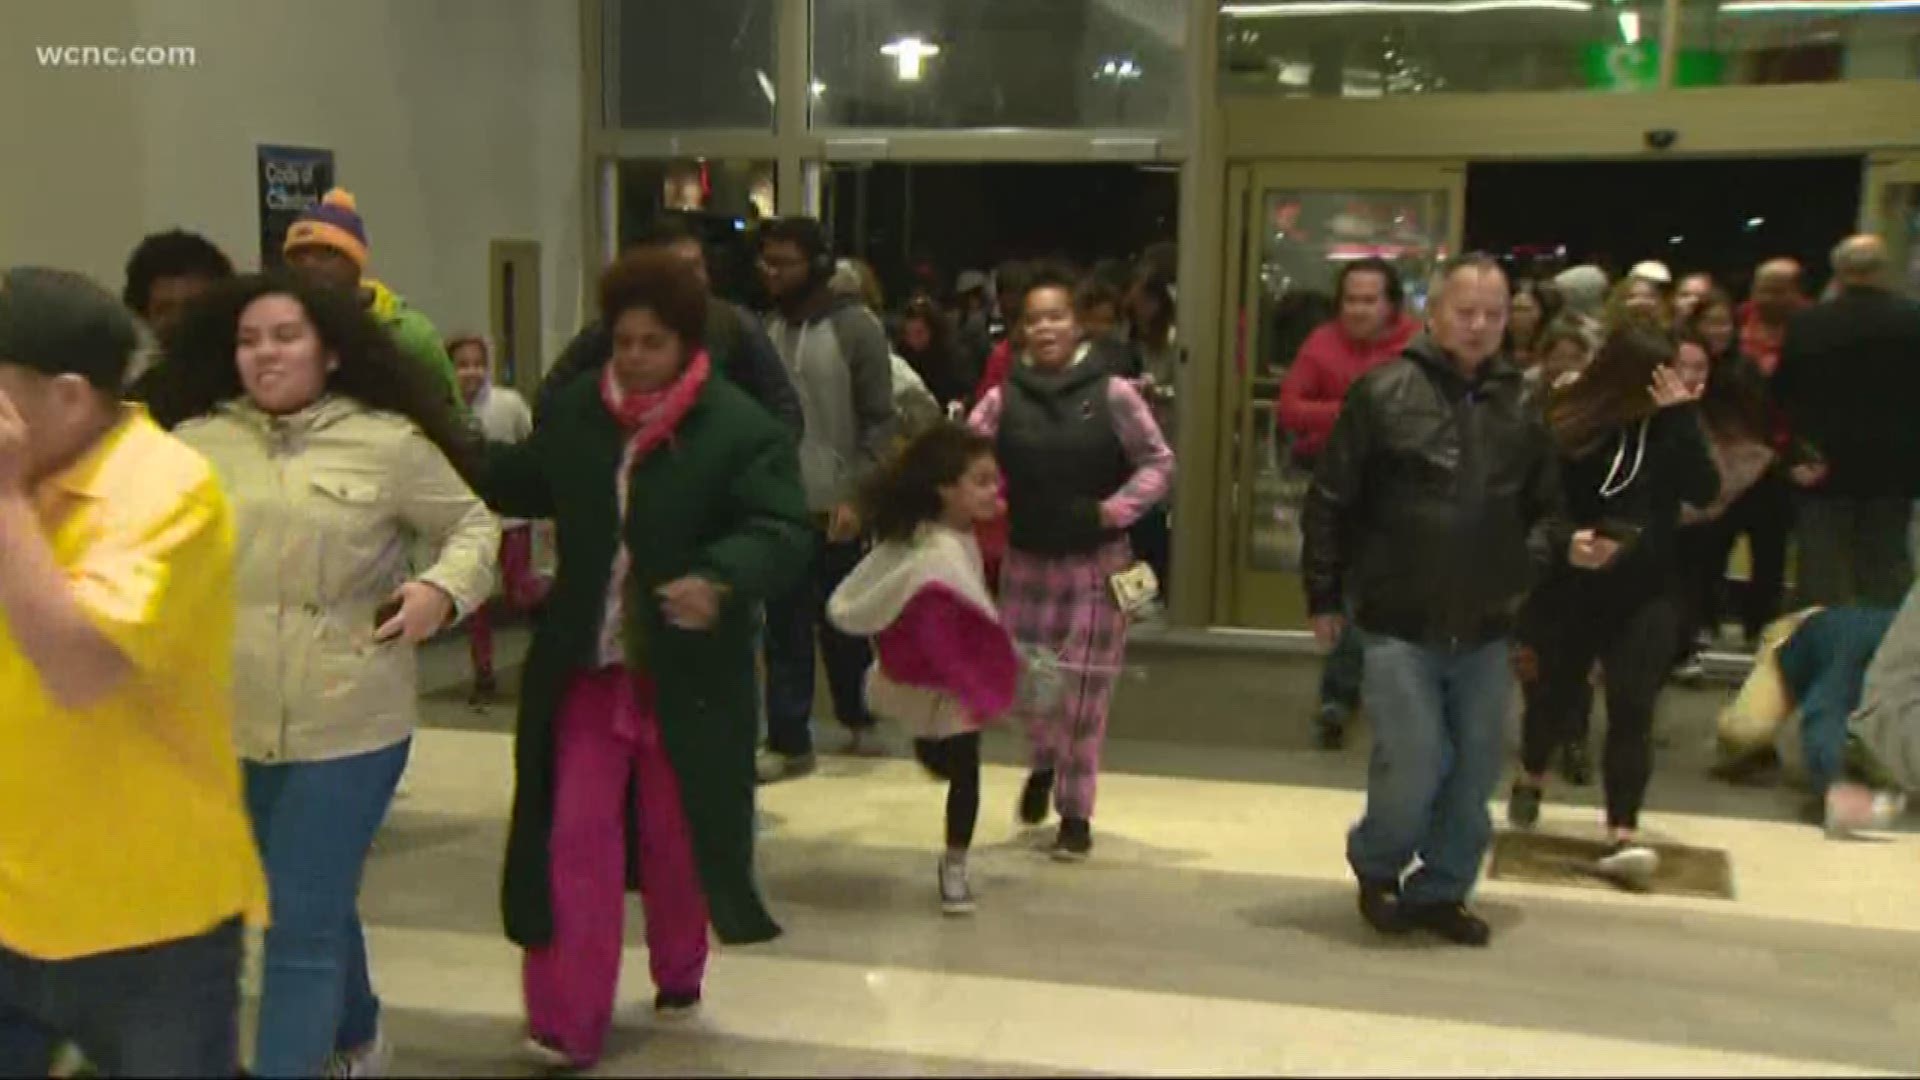 Thousands rush the doors during Black Friday in Charlotte